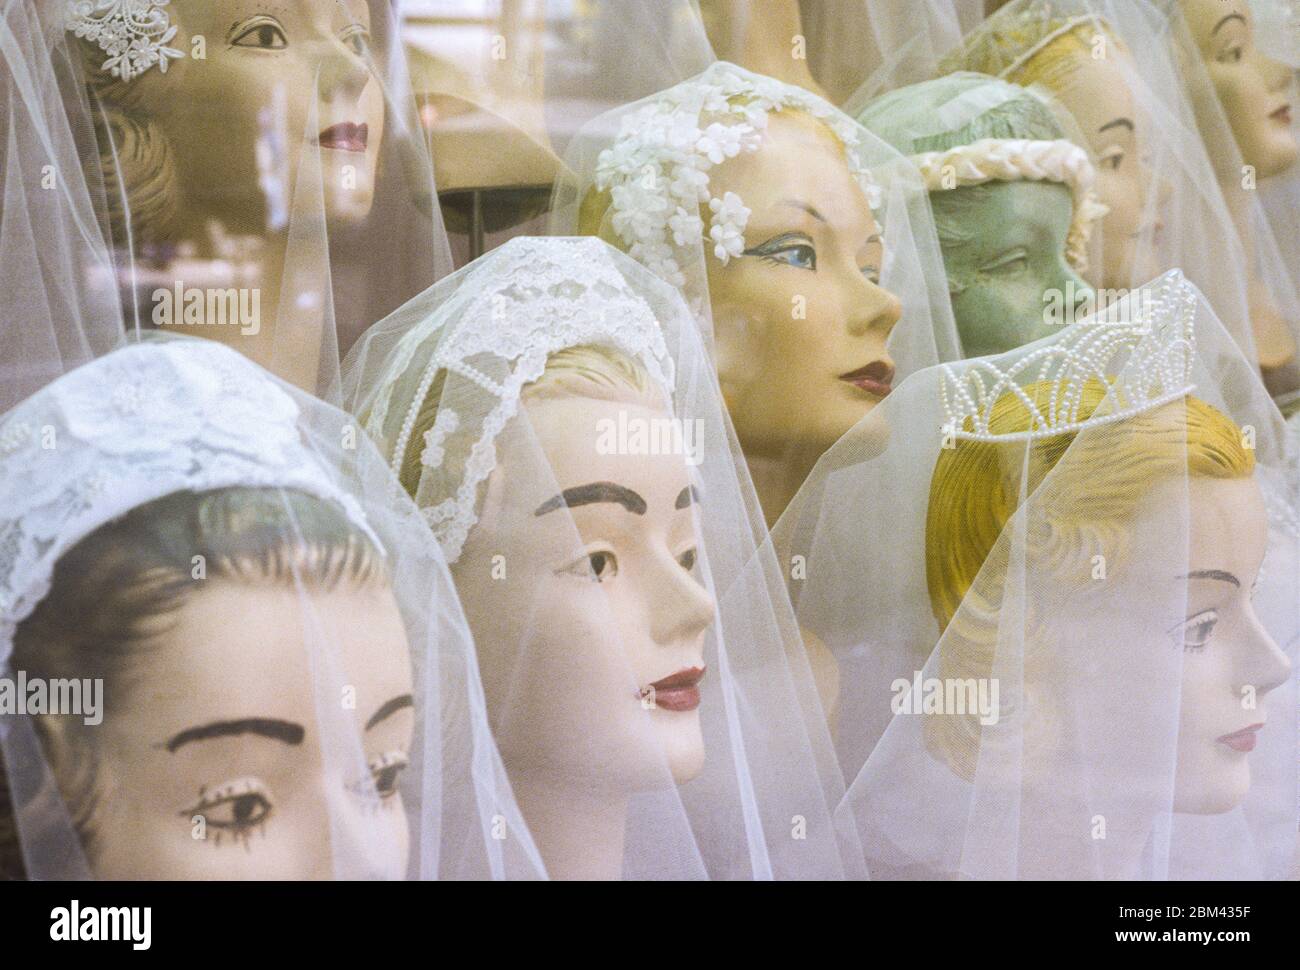 Bridal accessories in a window display on 57th Street in New York City sometime in the mid-1970's. Stock Photo